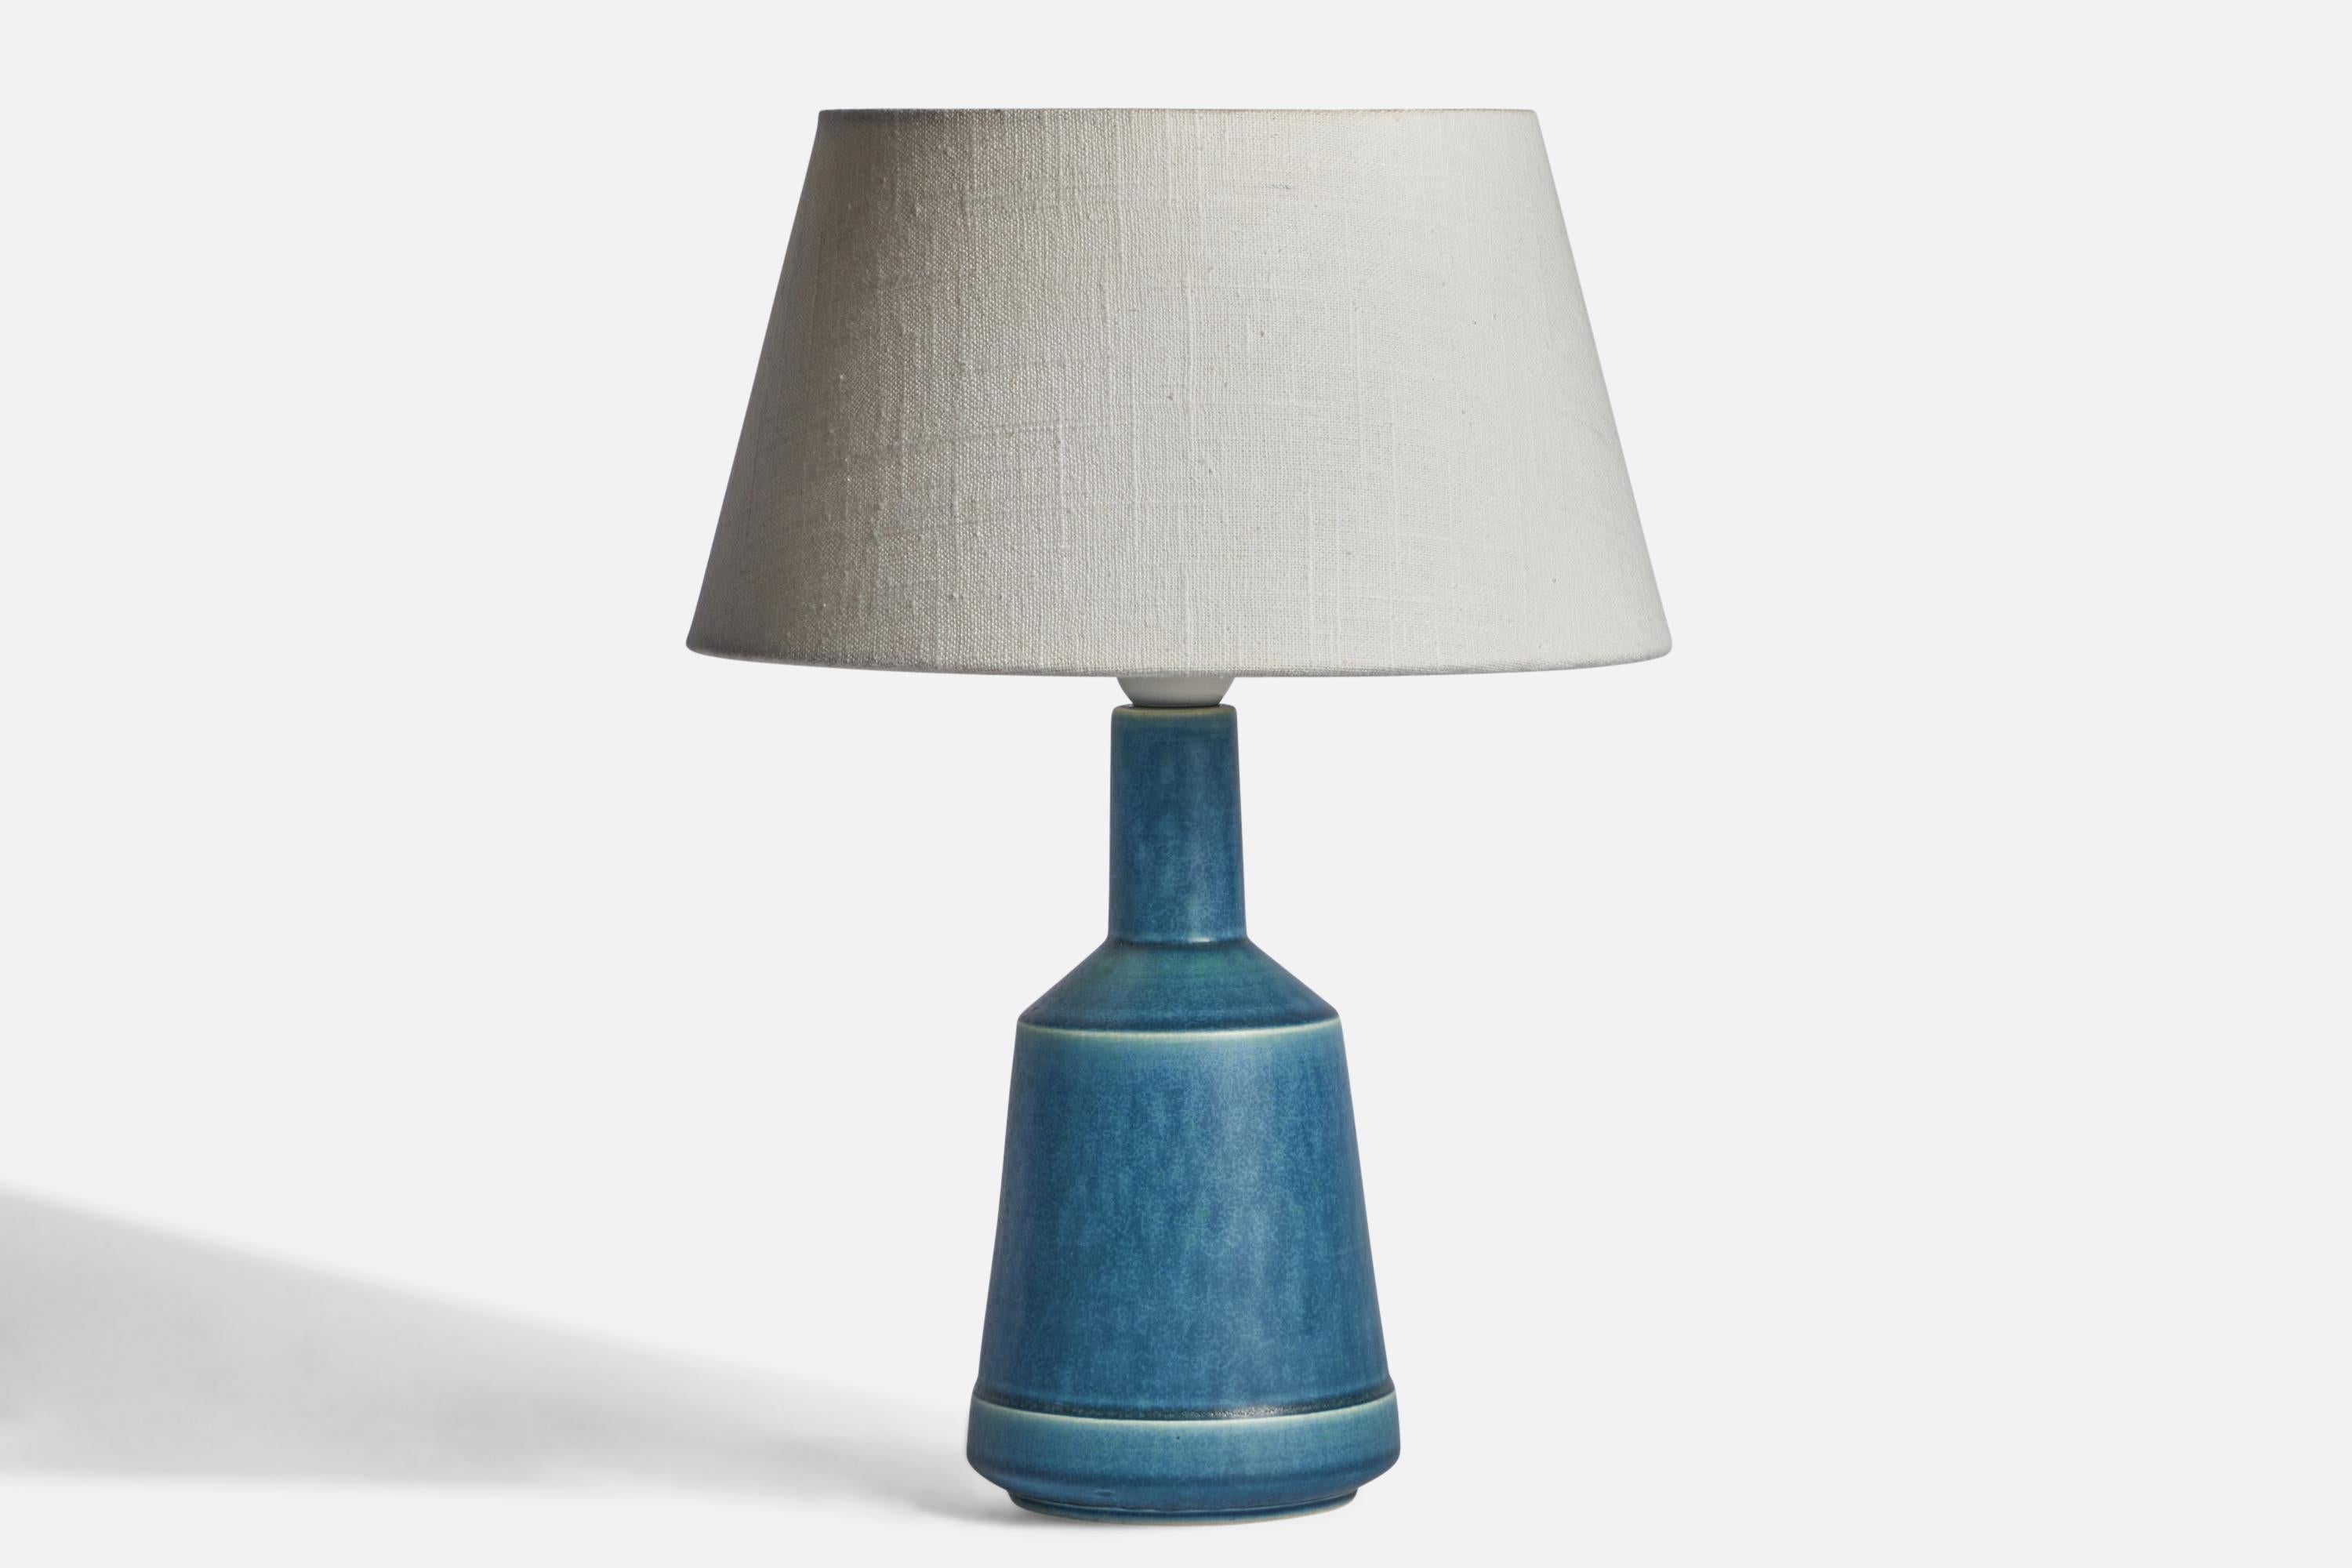 A blue-glazed stoneware table lamp designed and produced by Desiree, Denmark, 1960s.

Dimensions of Lamp (inches): 11.3” H x 4.5” Diameter
Dimensions of Shade (inches): 7” Top Diameter x 10” Bottom Diameter x 5.5” H 
Dimensions of Lamp with Shade